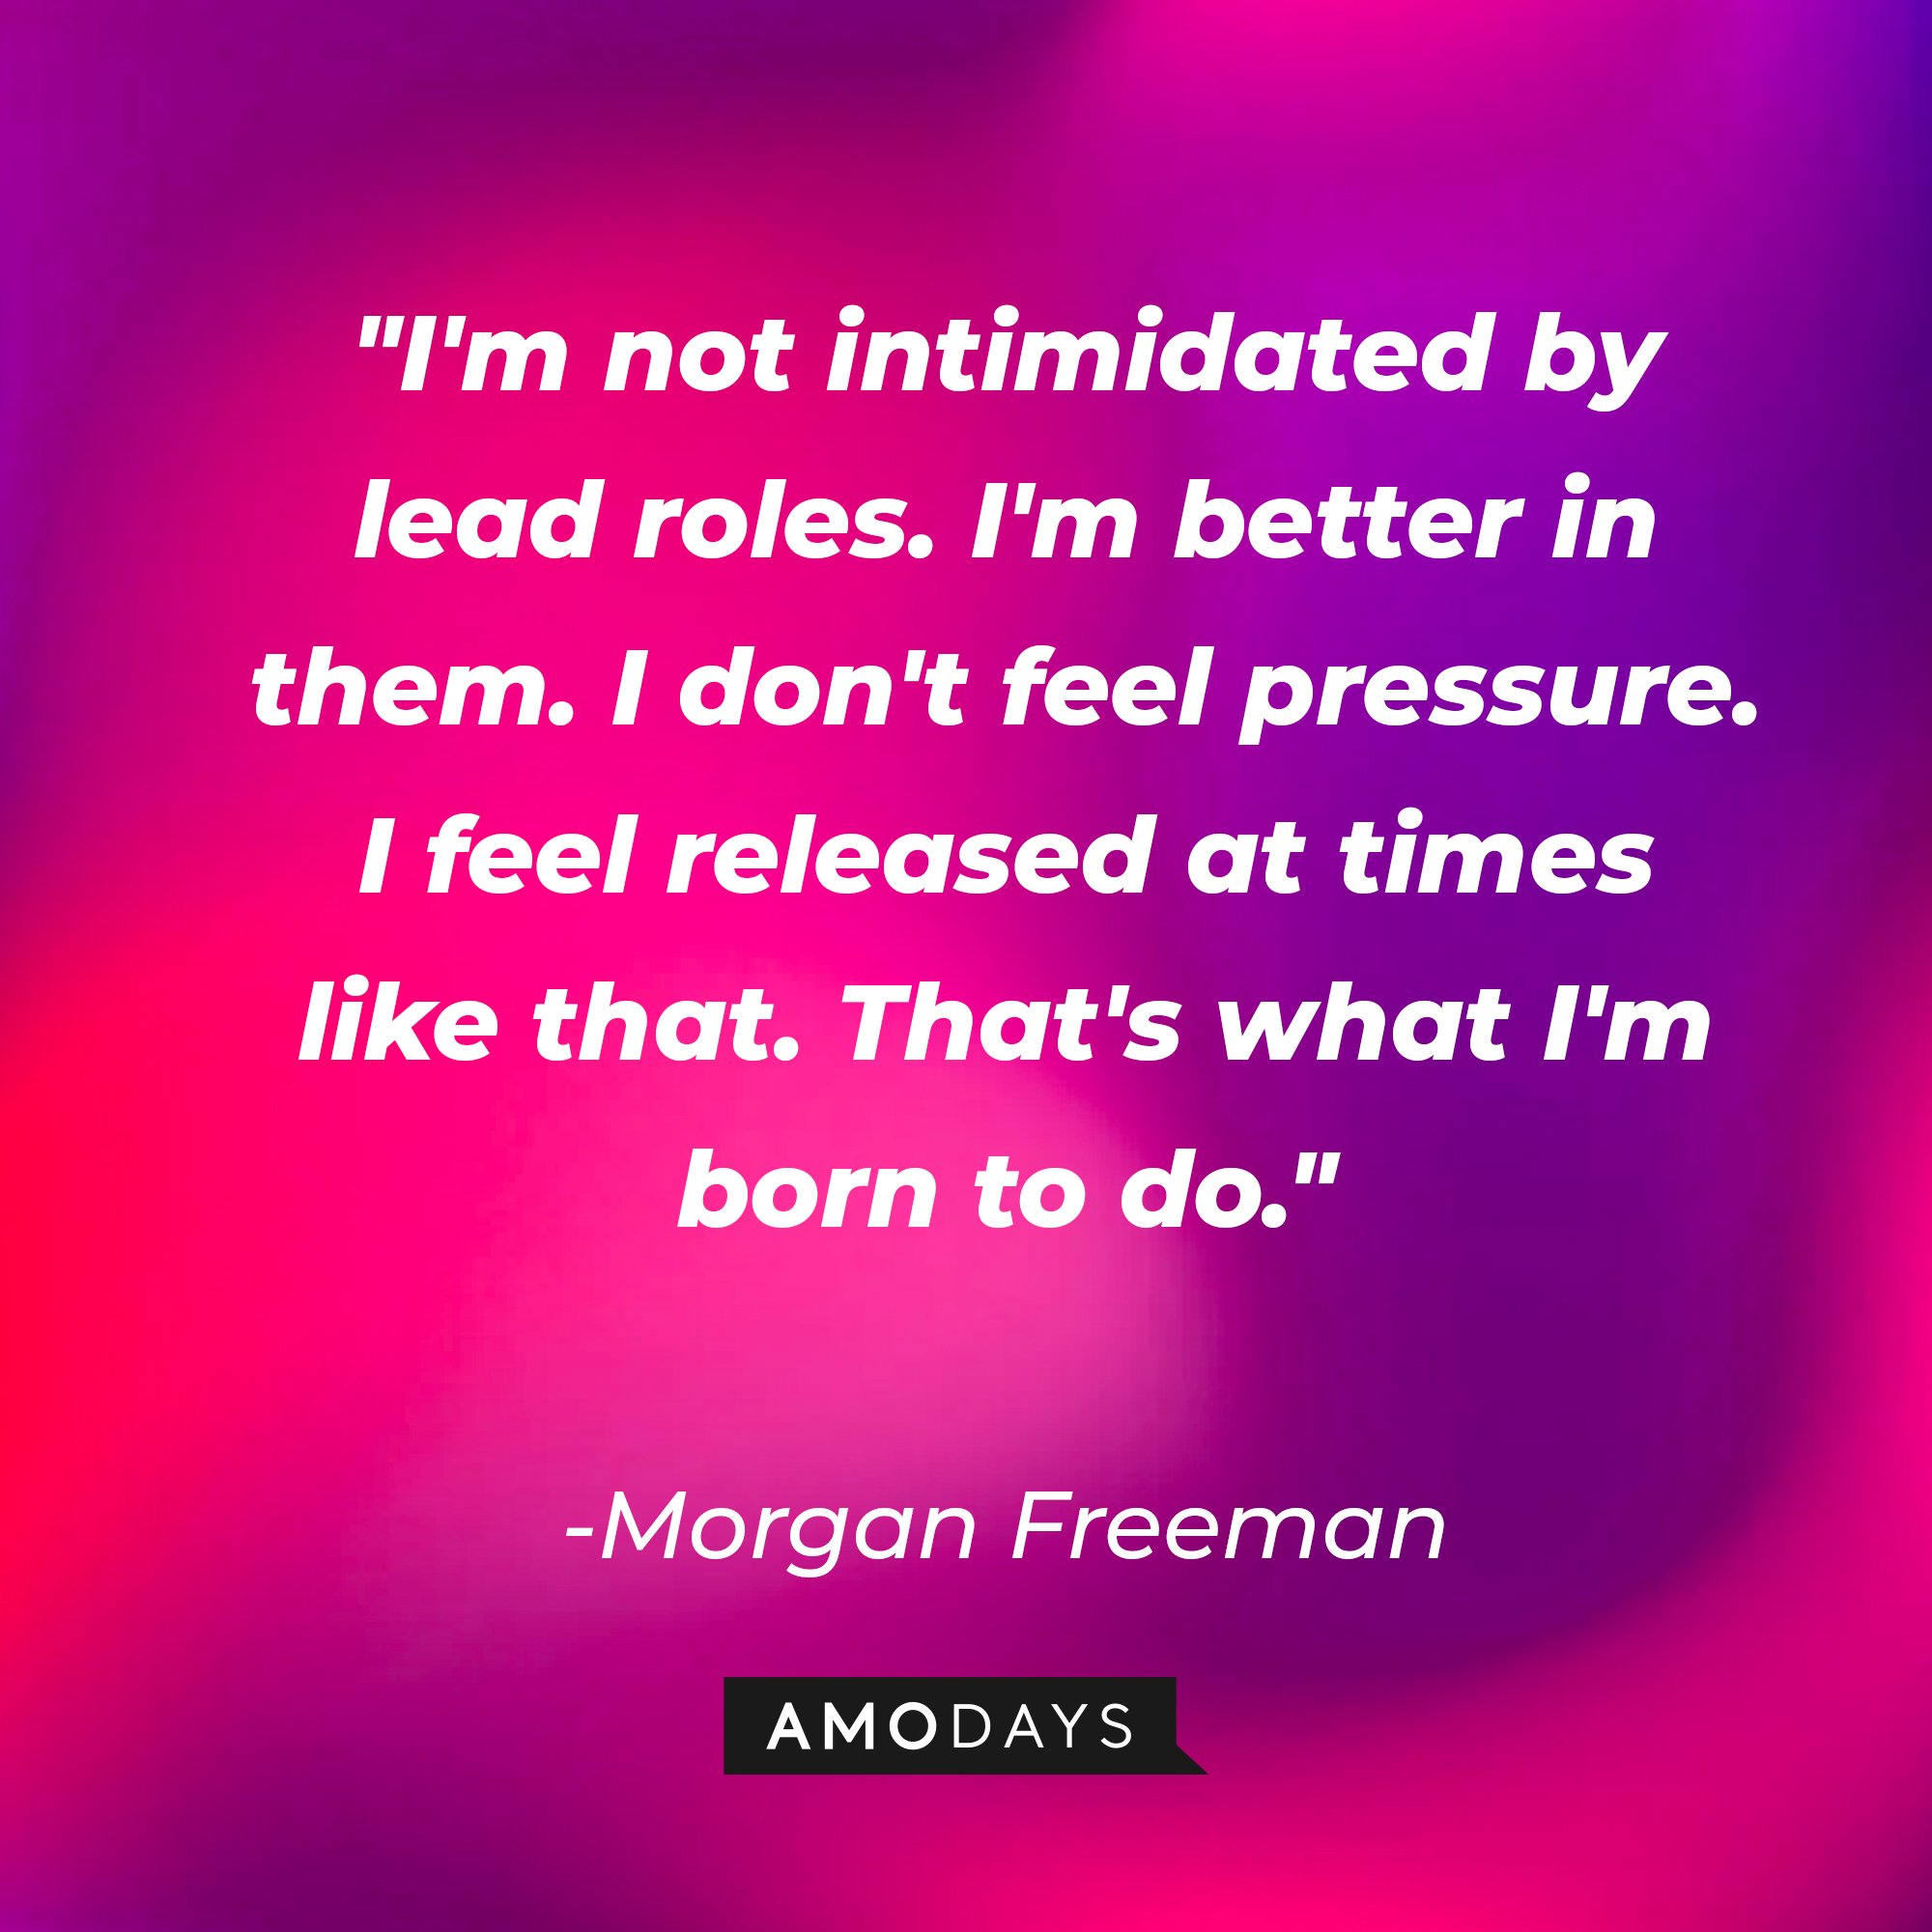  Morgan Freeman’s quote: "I'm not intimidated by lead roles. I'm better in them. I don't feel pressure. I feel released at times like that. That's what I'm born to do." | Image: AmoDays